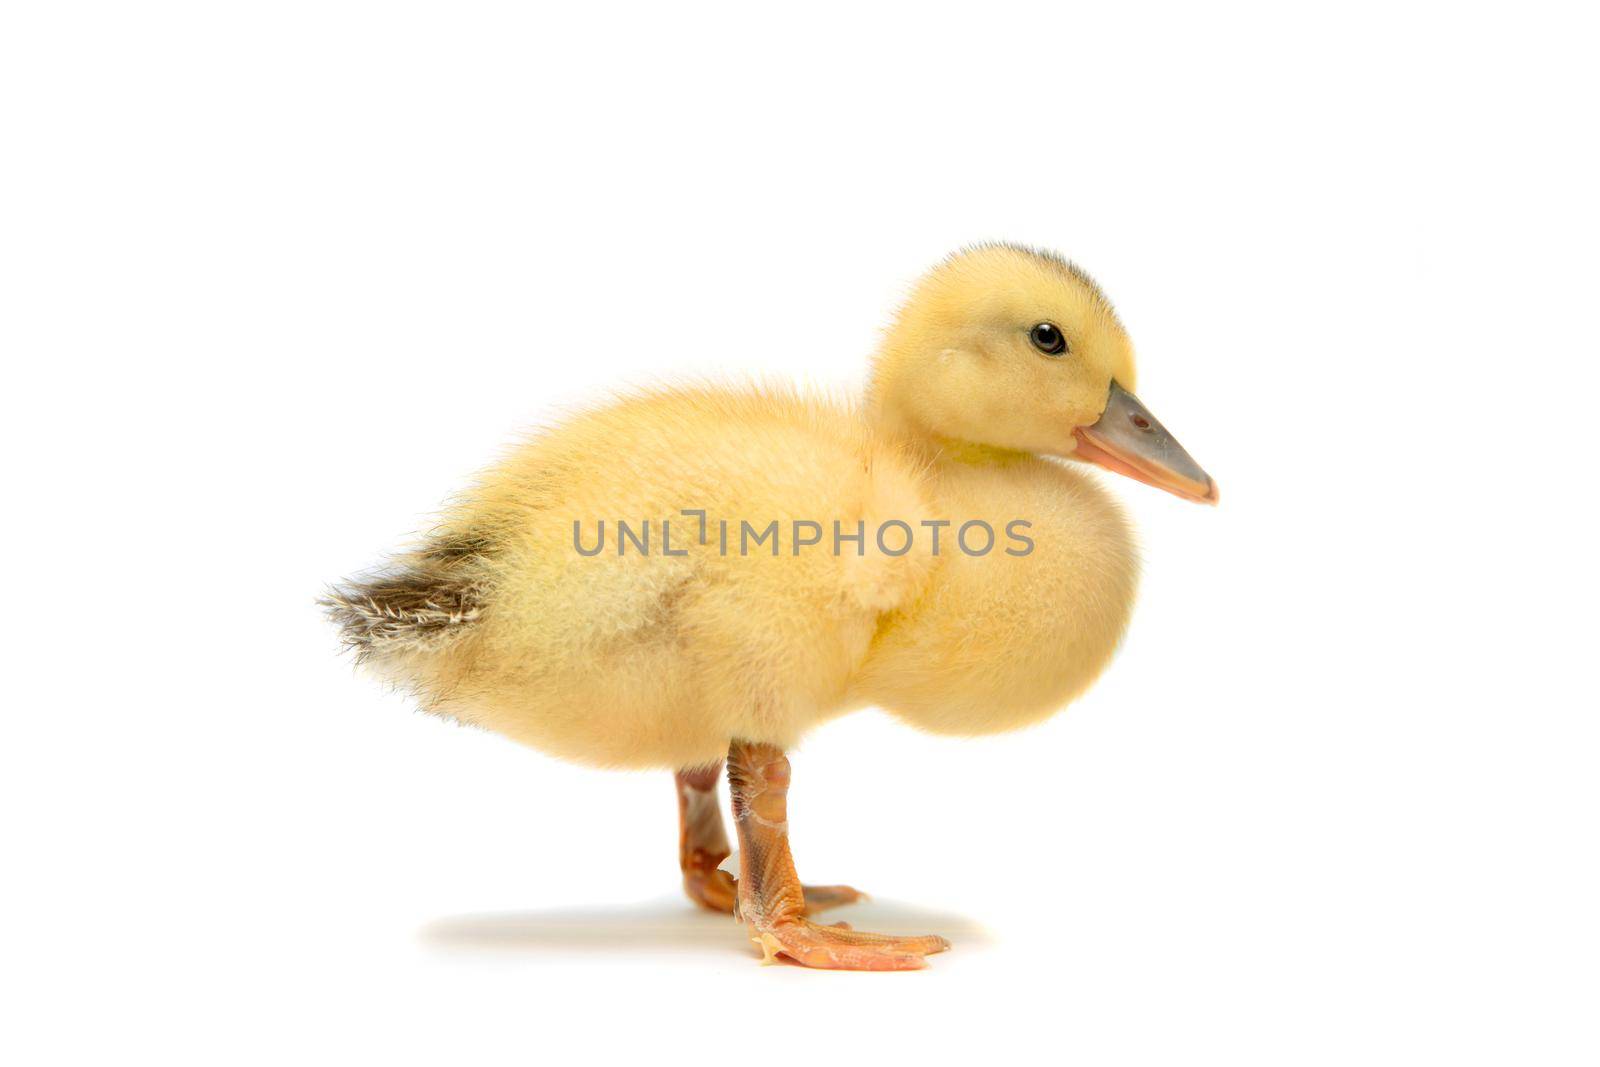 Small pretty duckling, 2 days old, isolated on white background